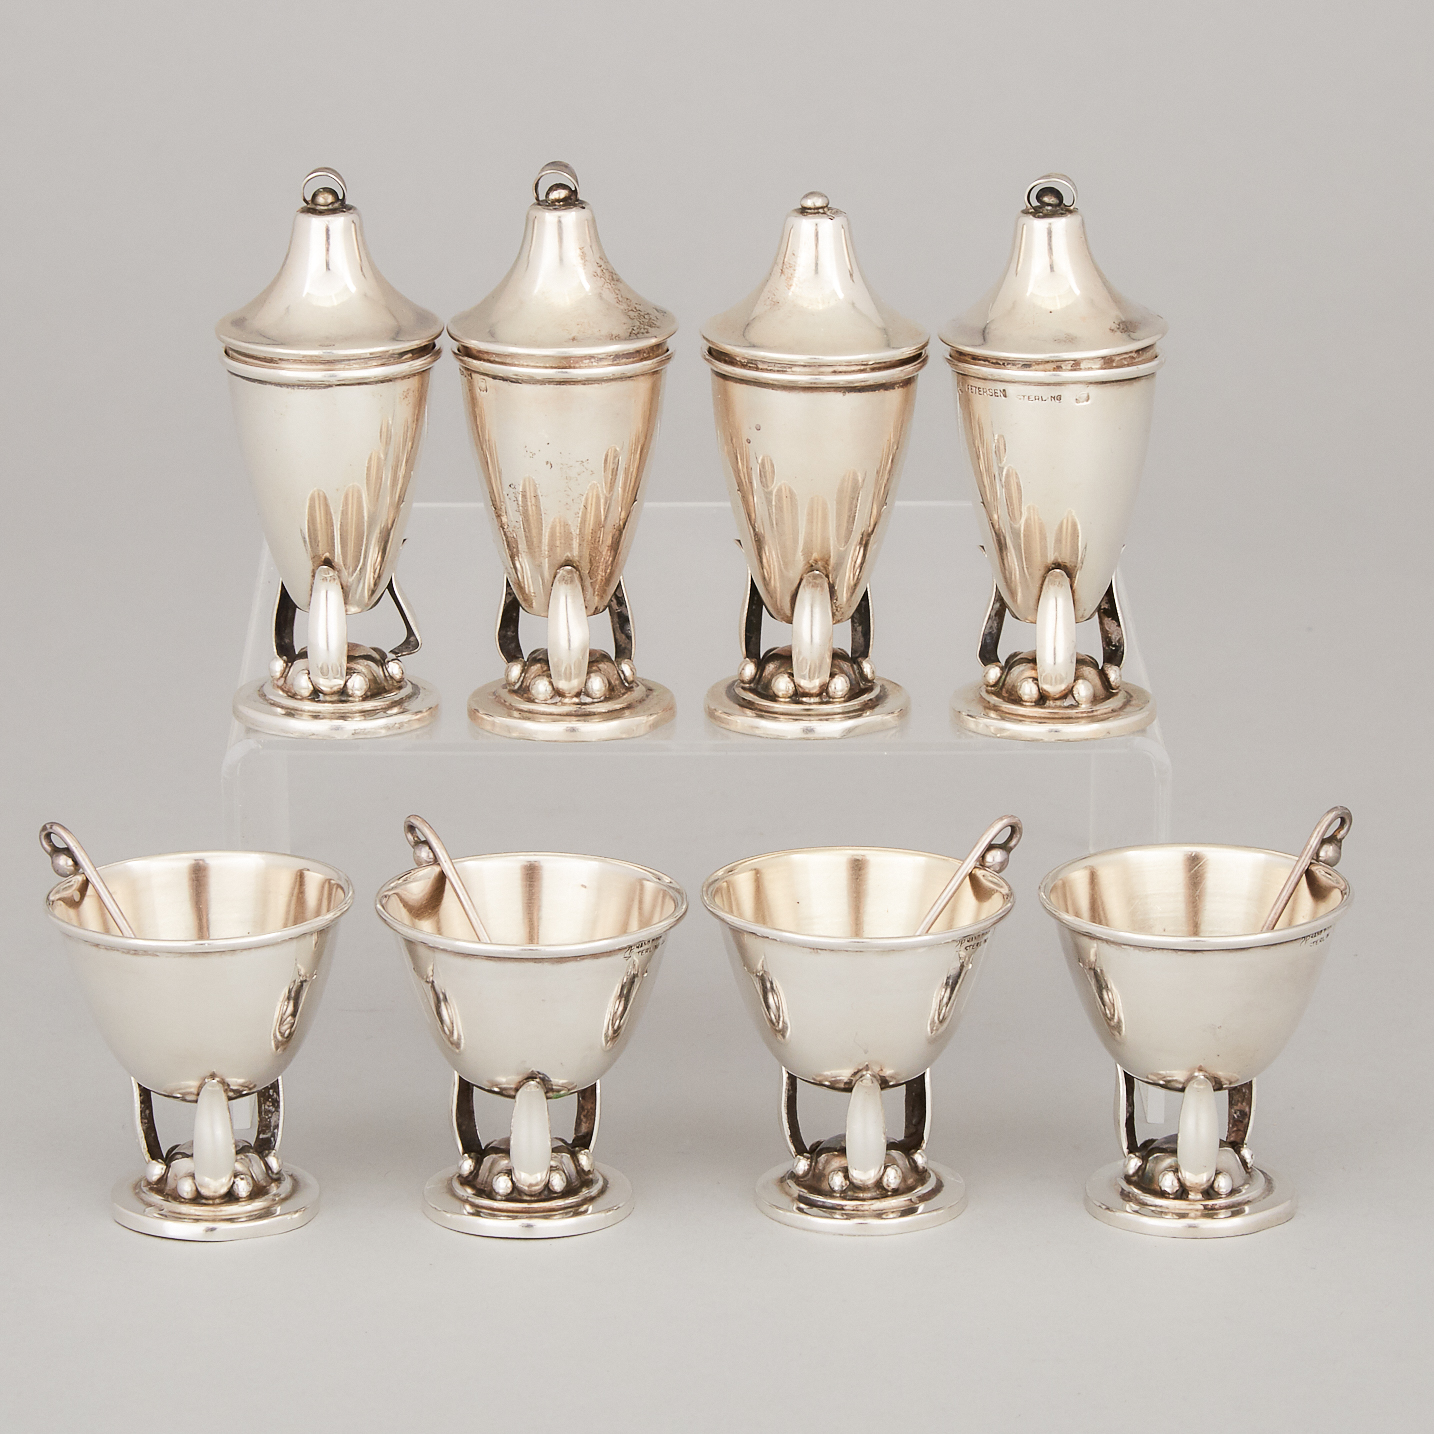 Four Canadian Silver Pepper Casters and Four Salt Cellars with Spoons, Carl Poul Petersen, Montreal, Que., mid-20th century